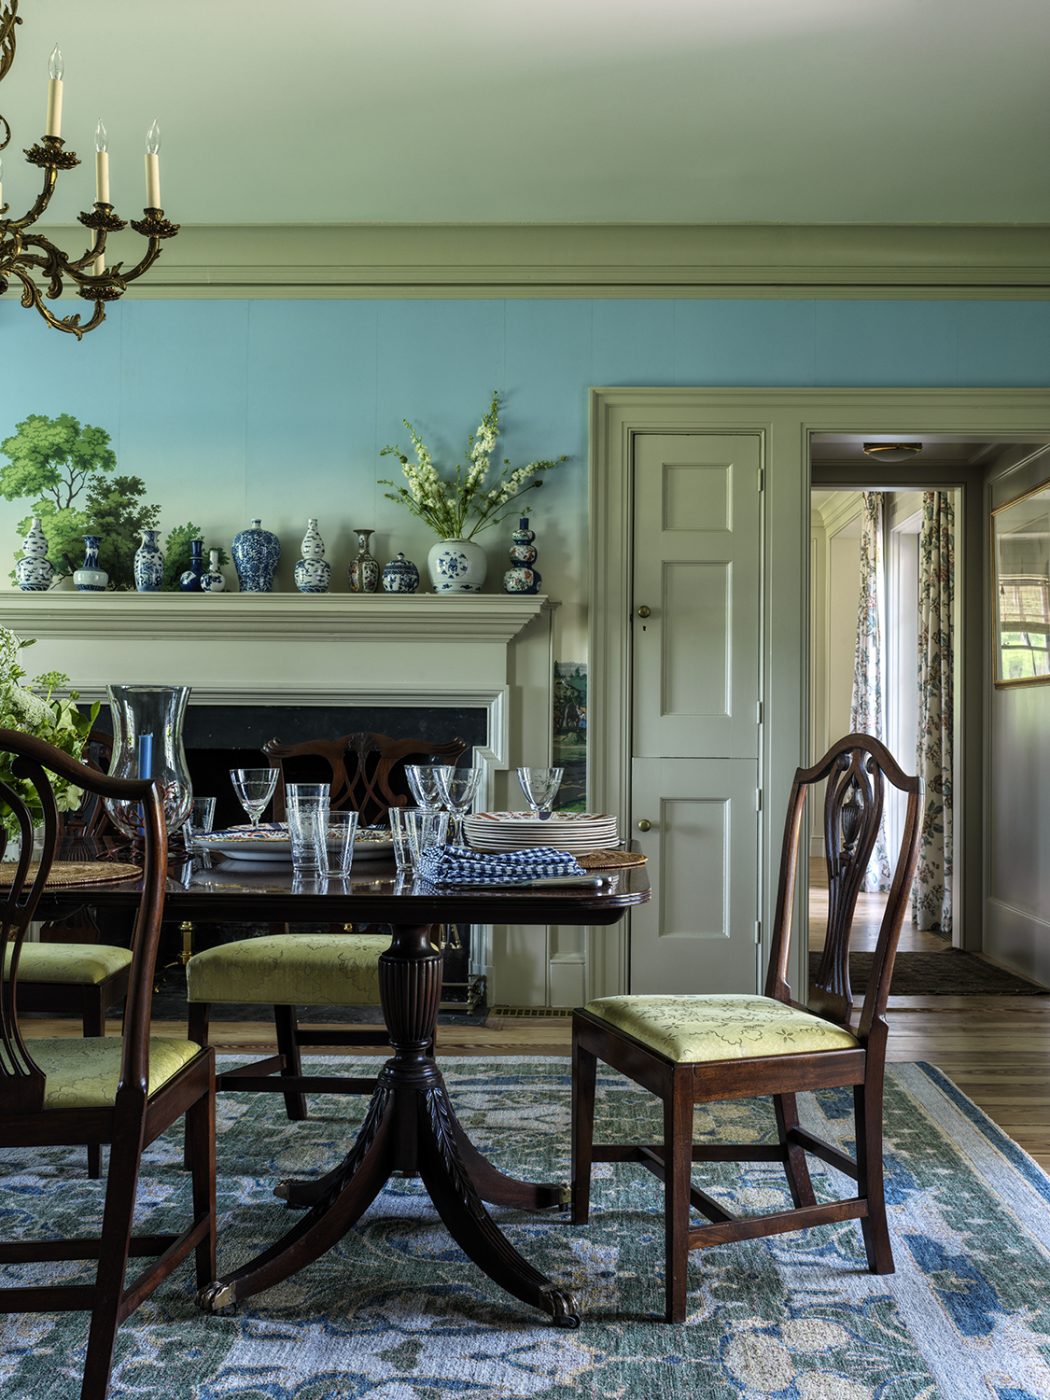 dining room of an 18th-century farmhouse restored and designed by Hendricks Churchill ,with scenic wallpaper and antiques